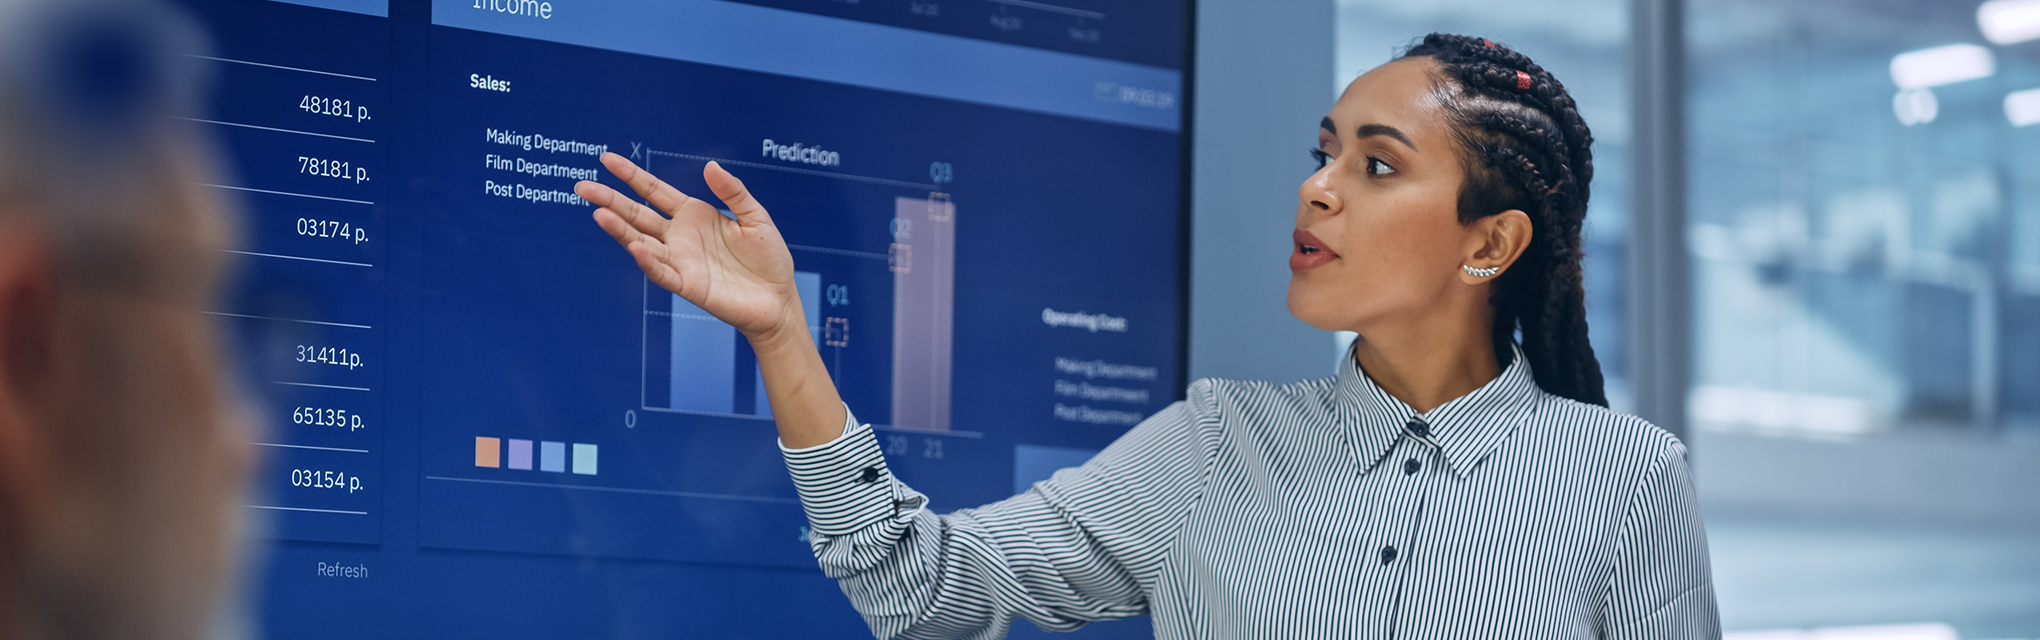 A woman stands in front of a screen, actively involved in Data Governance.